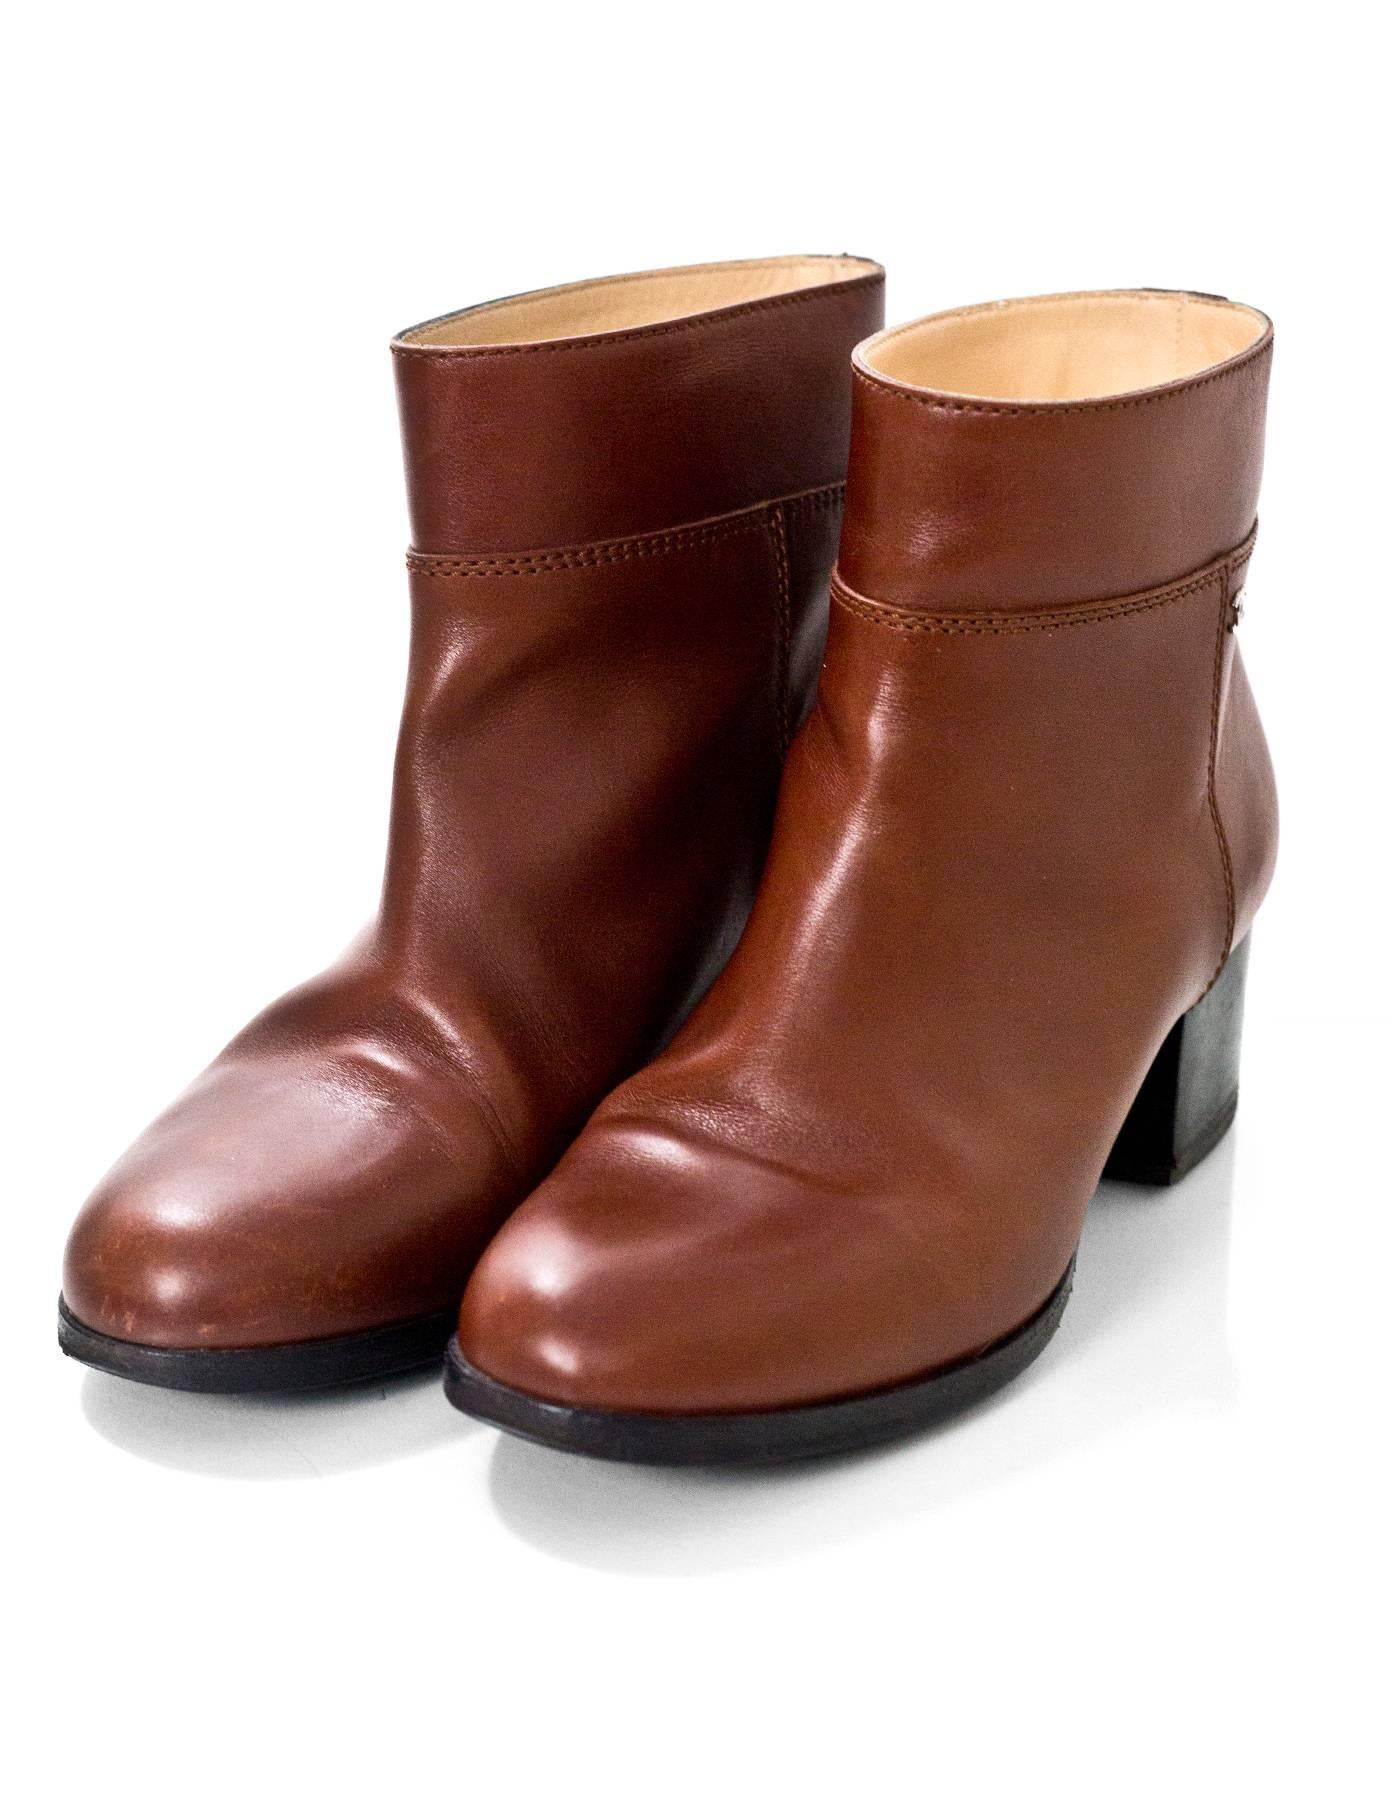 Chanel Brown Leather Ankle Boots Sz 37

Made In: Italy
Color: Brown
Materials: Leather
Closure/Opening: Pull on
Sole Stamp: CC 37
Overall Condition: Excellent pre-owned condition with the exception of light wear at outsoles, light creasing at